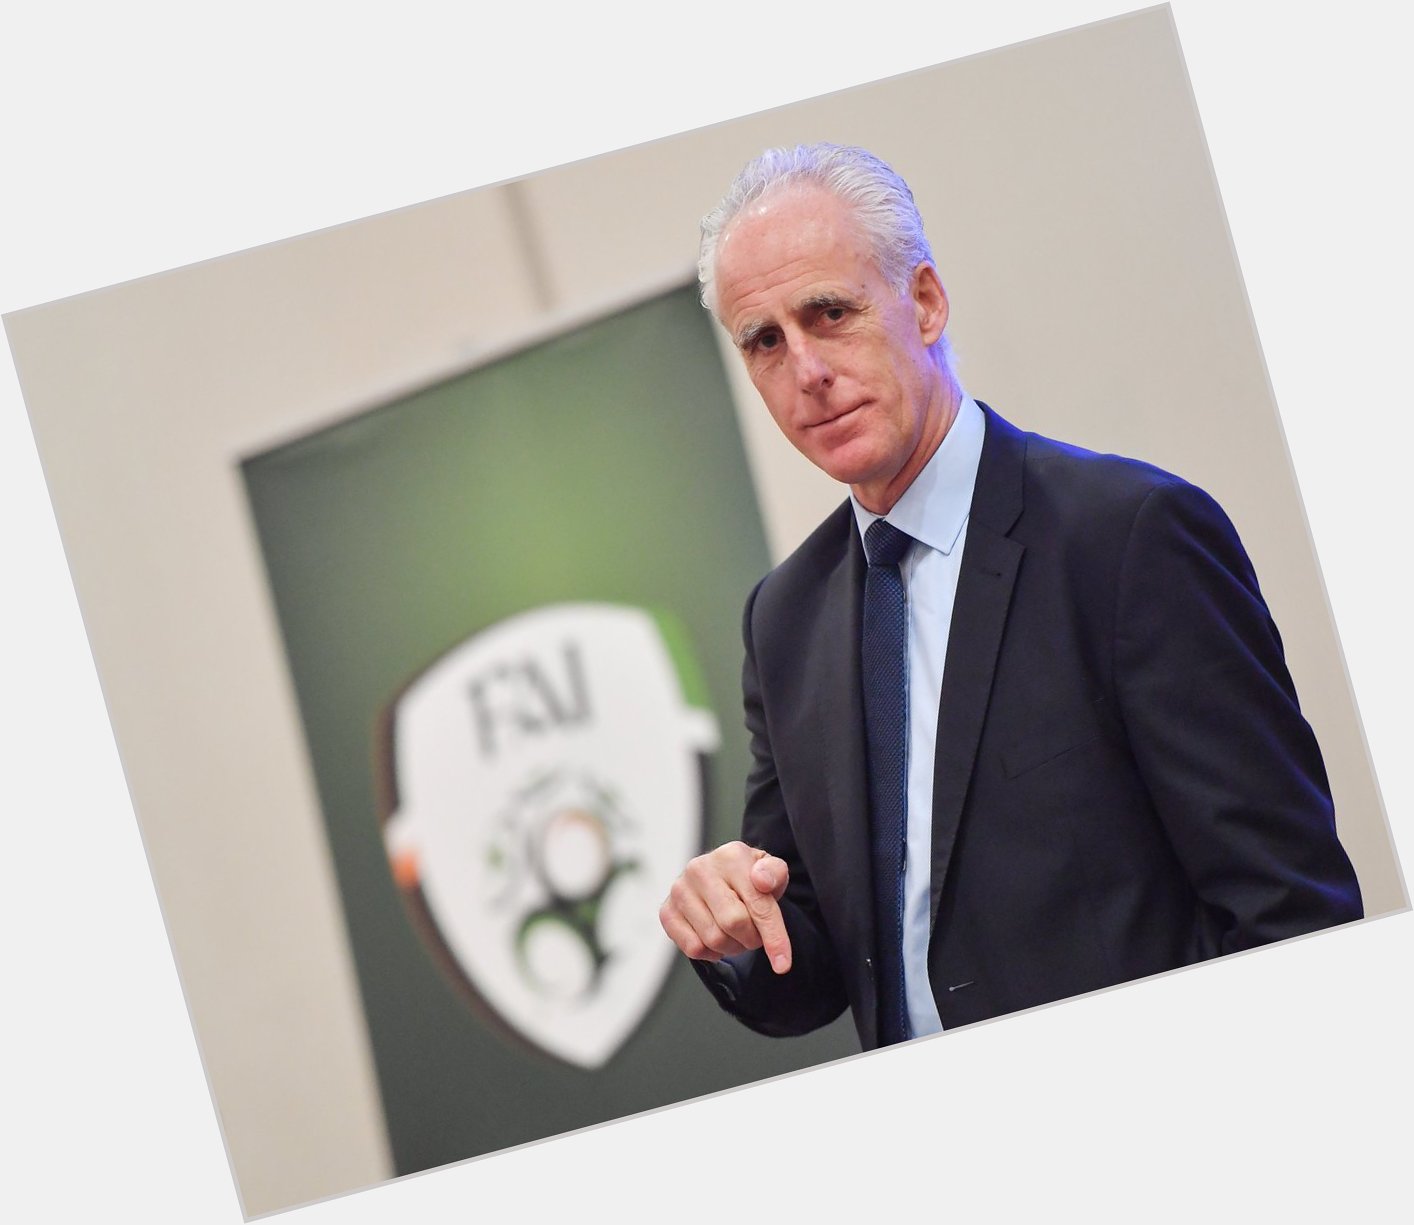 Happy Birthday, Mick McCarthy  . 

The Ireland manager turns 60 today  